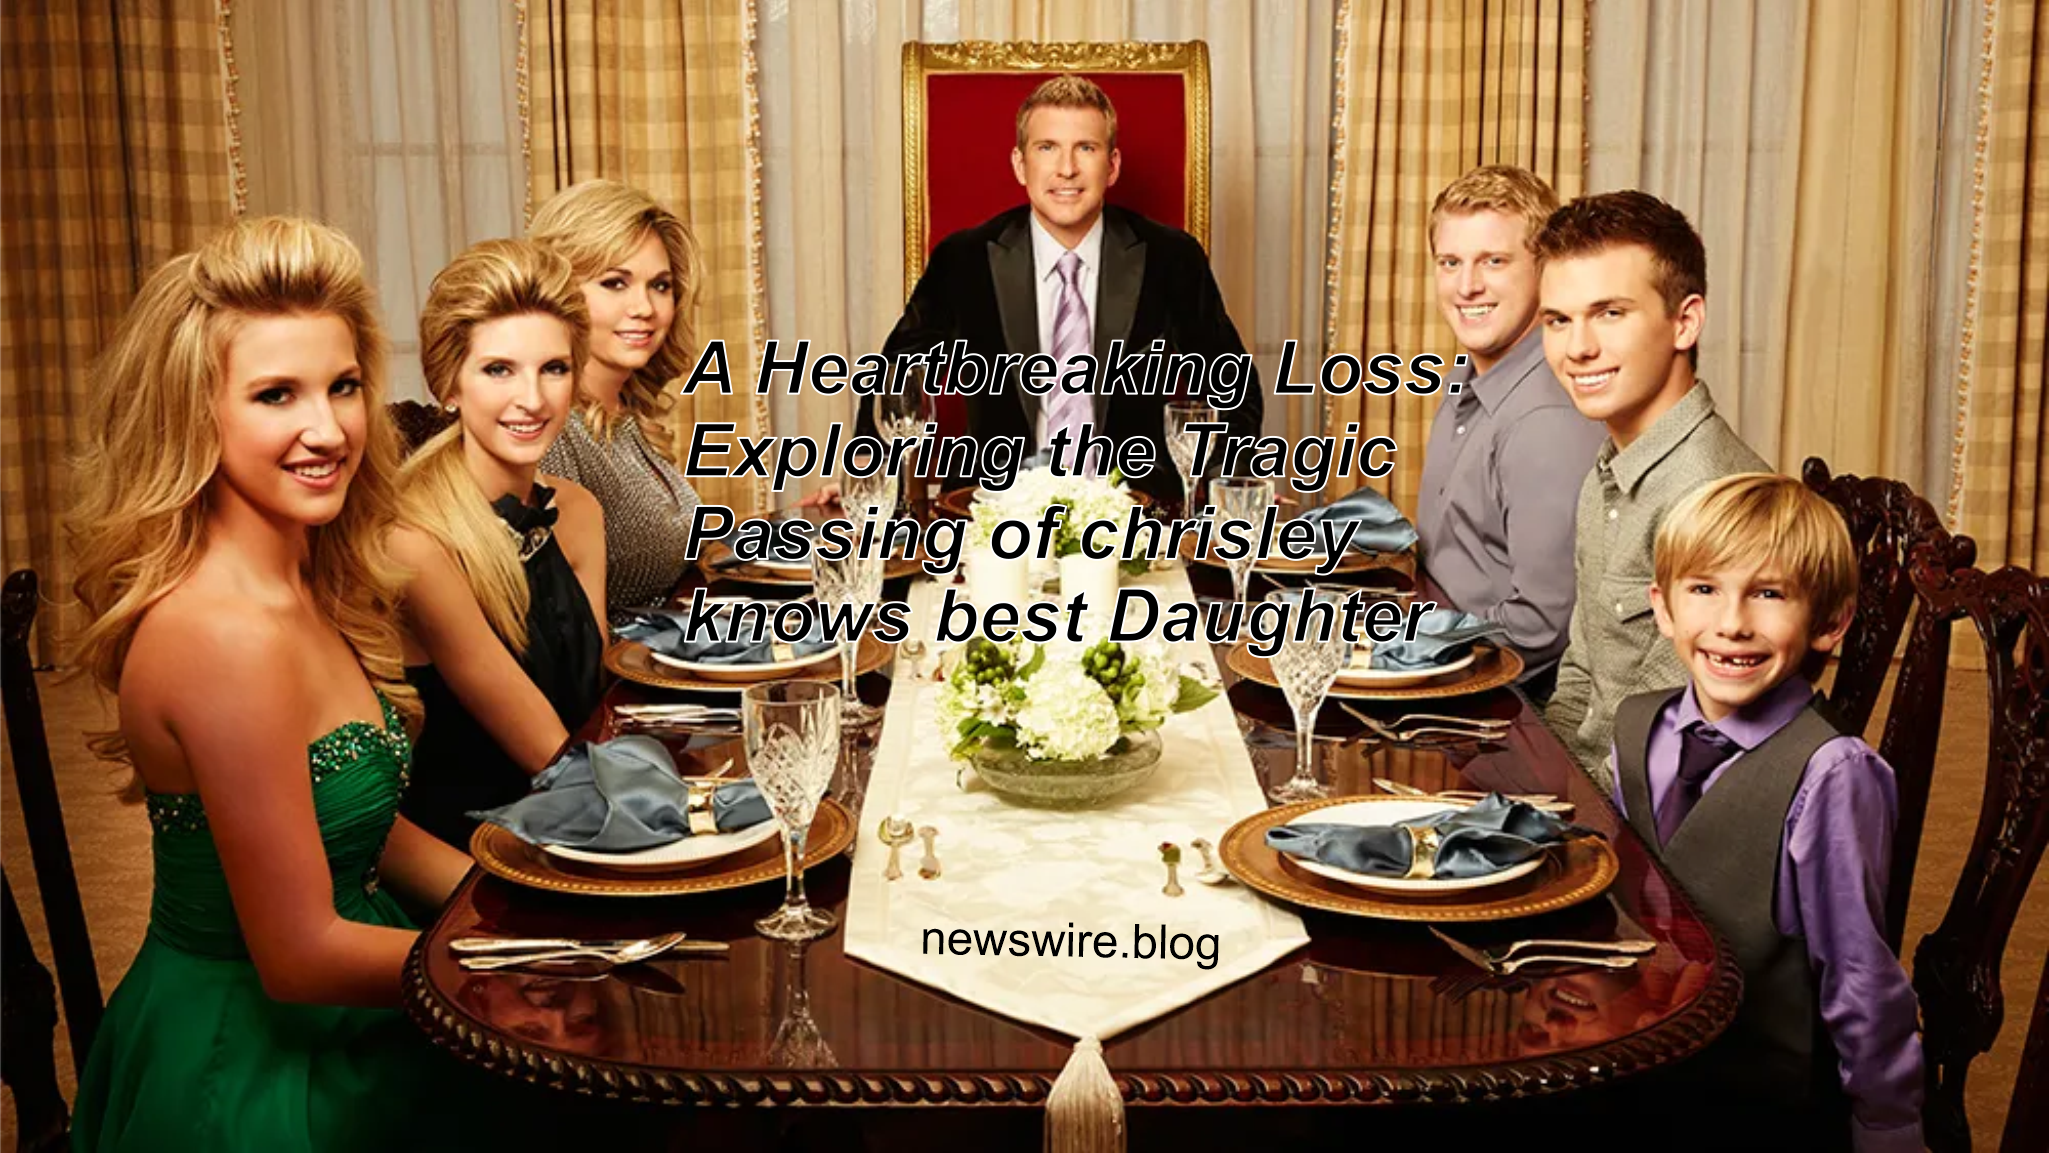 A Heartbreaking Loss: Exploring the Tragic Passing of chrisley knows best Daughter